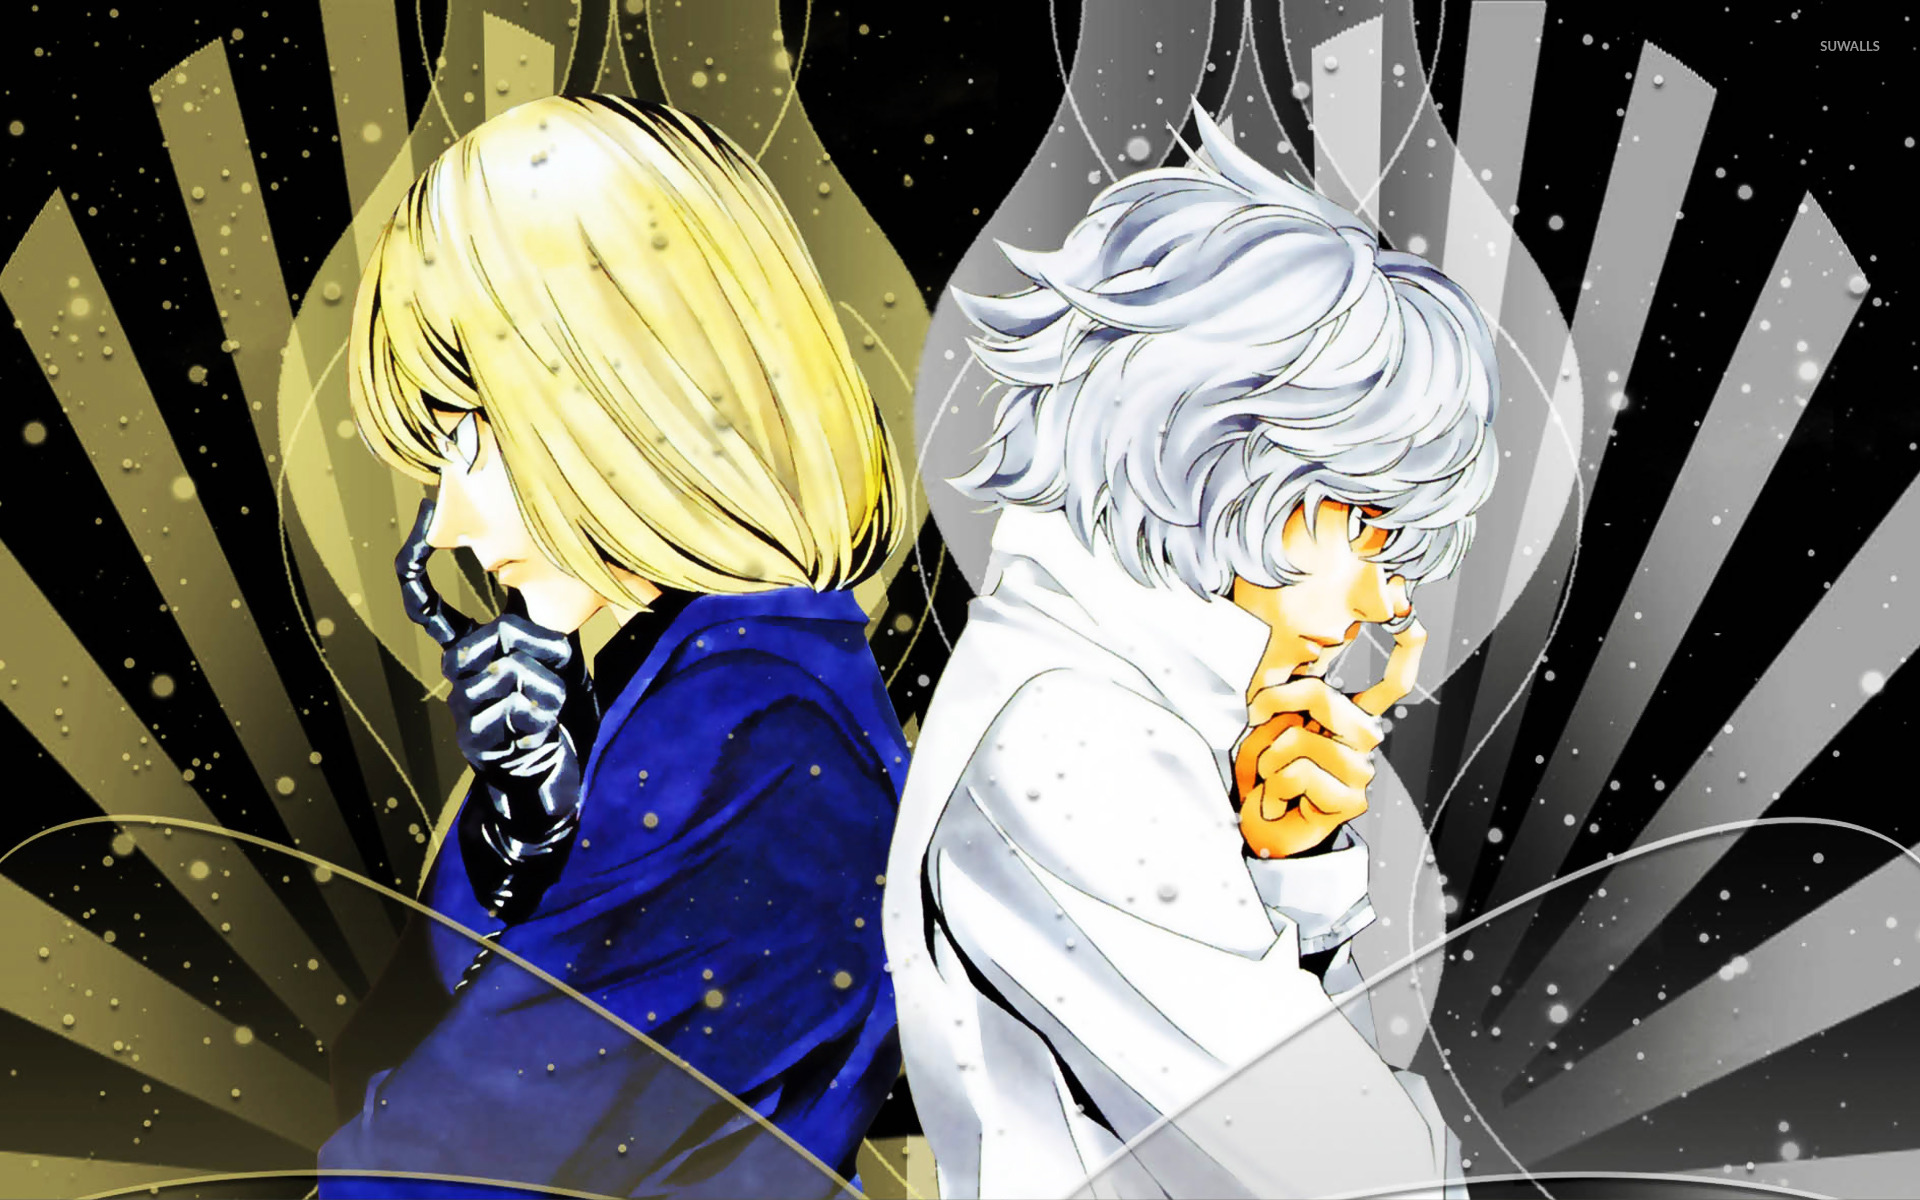 Mello and Near wallpaper - Anime wallpapers - #14043